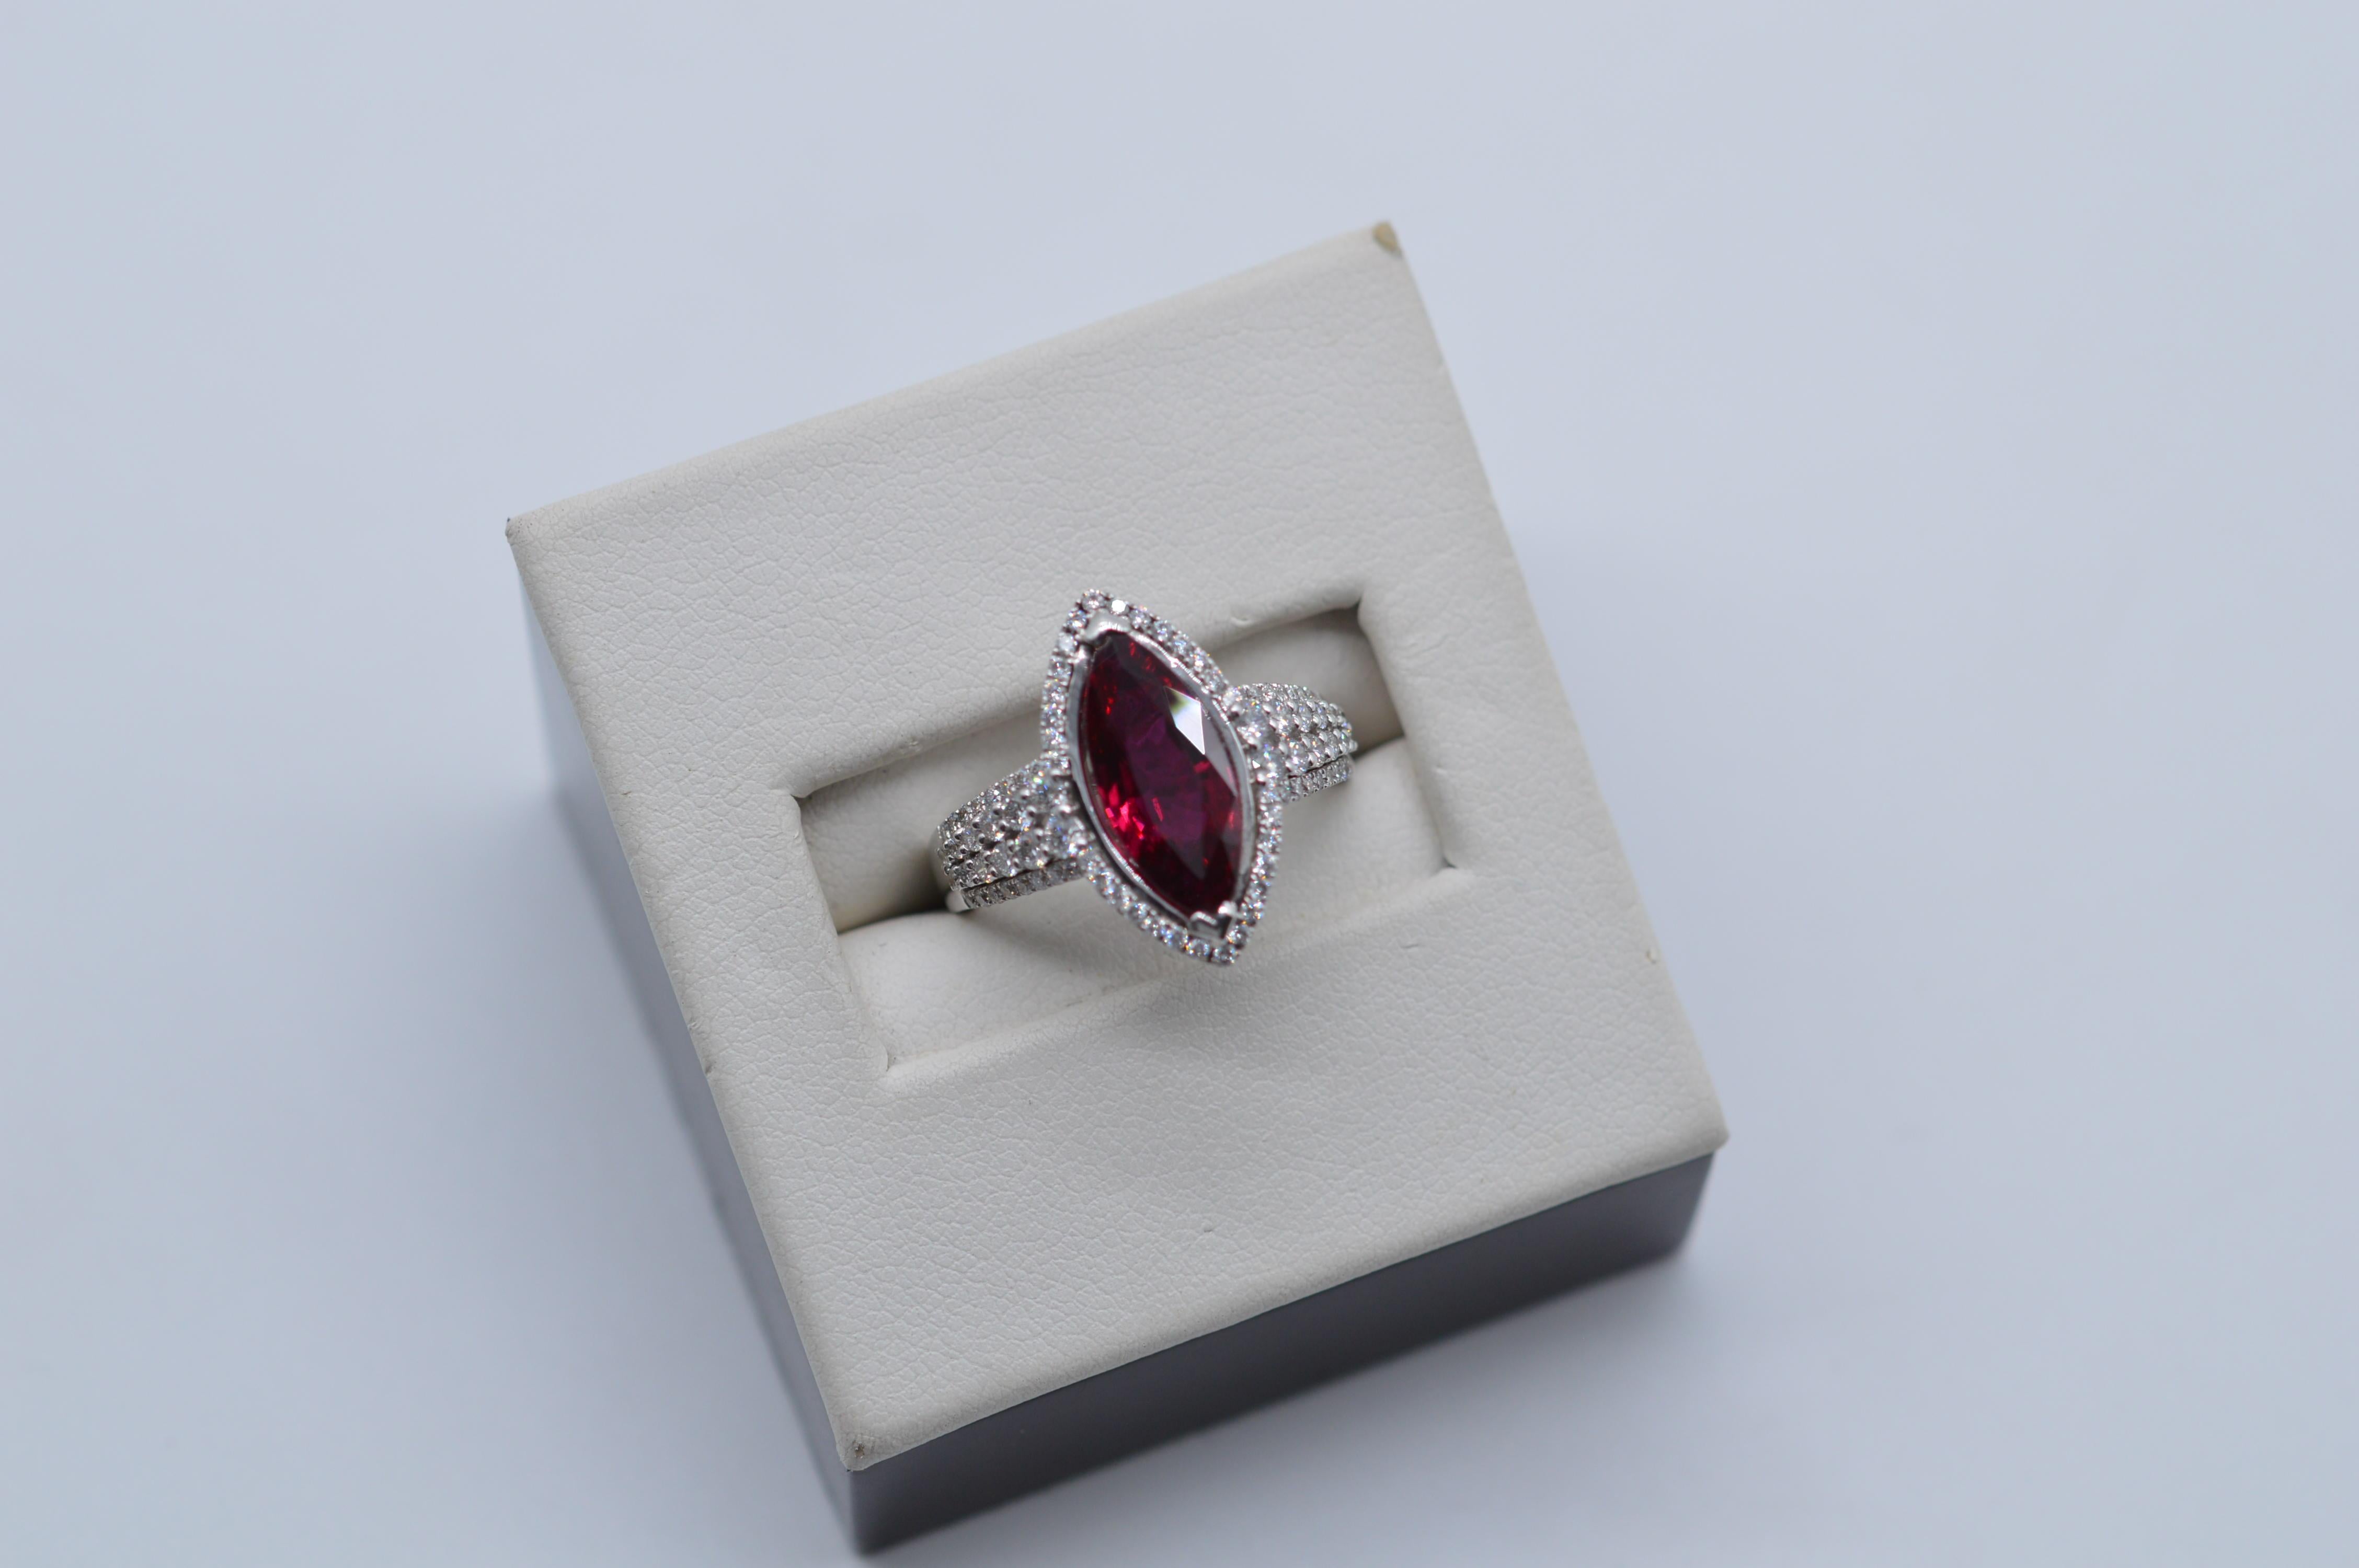 Siam Marquise Ruby Ring 2.95 Cts Heated C.Dunaigre Certified Unworn For Sale 4